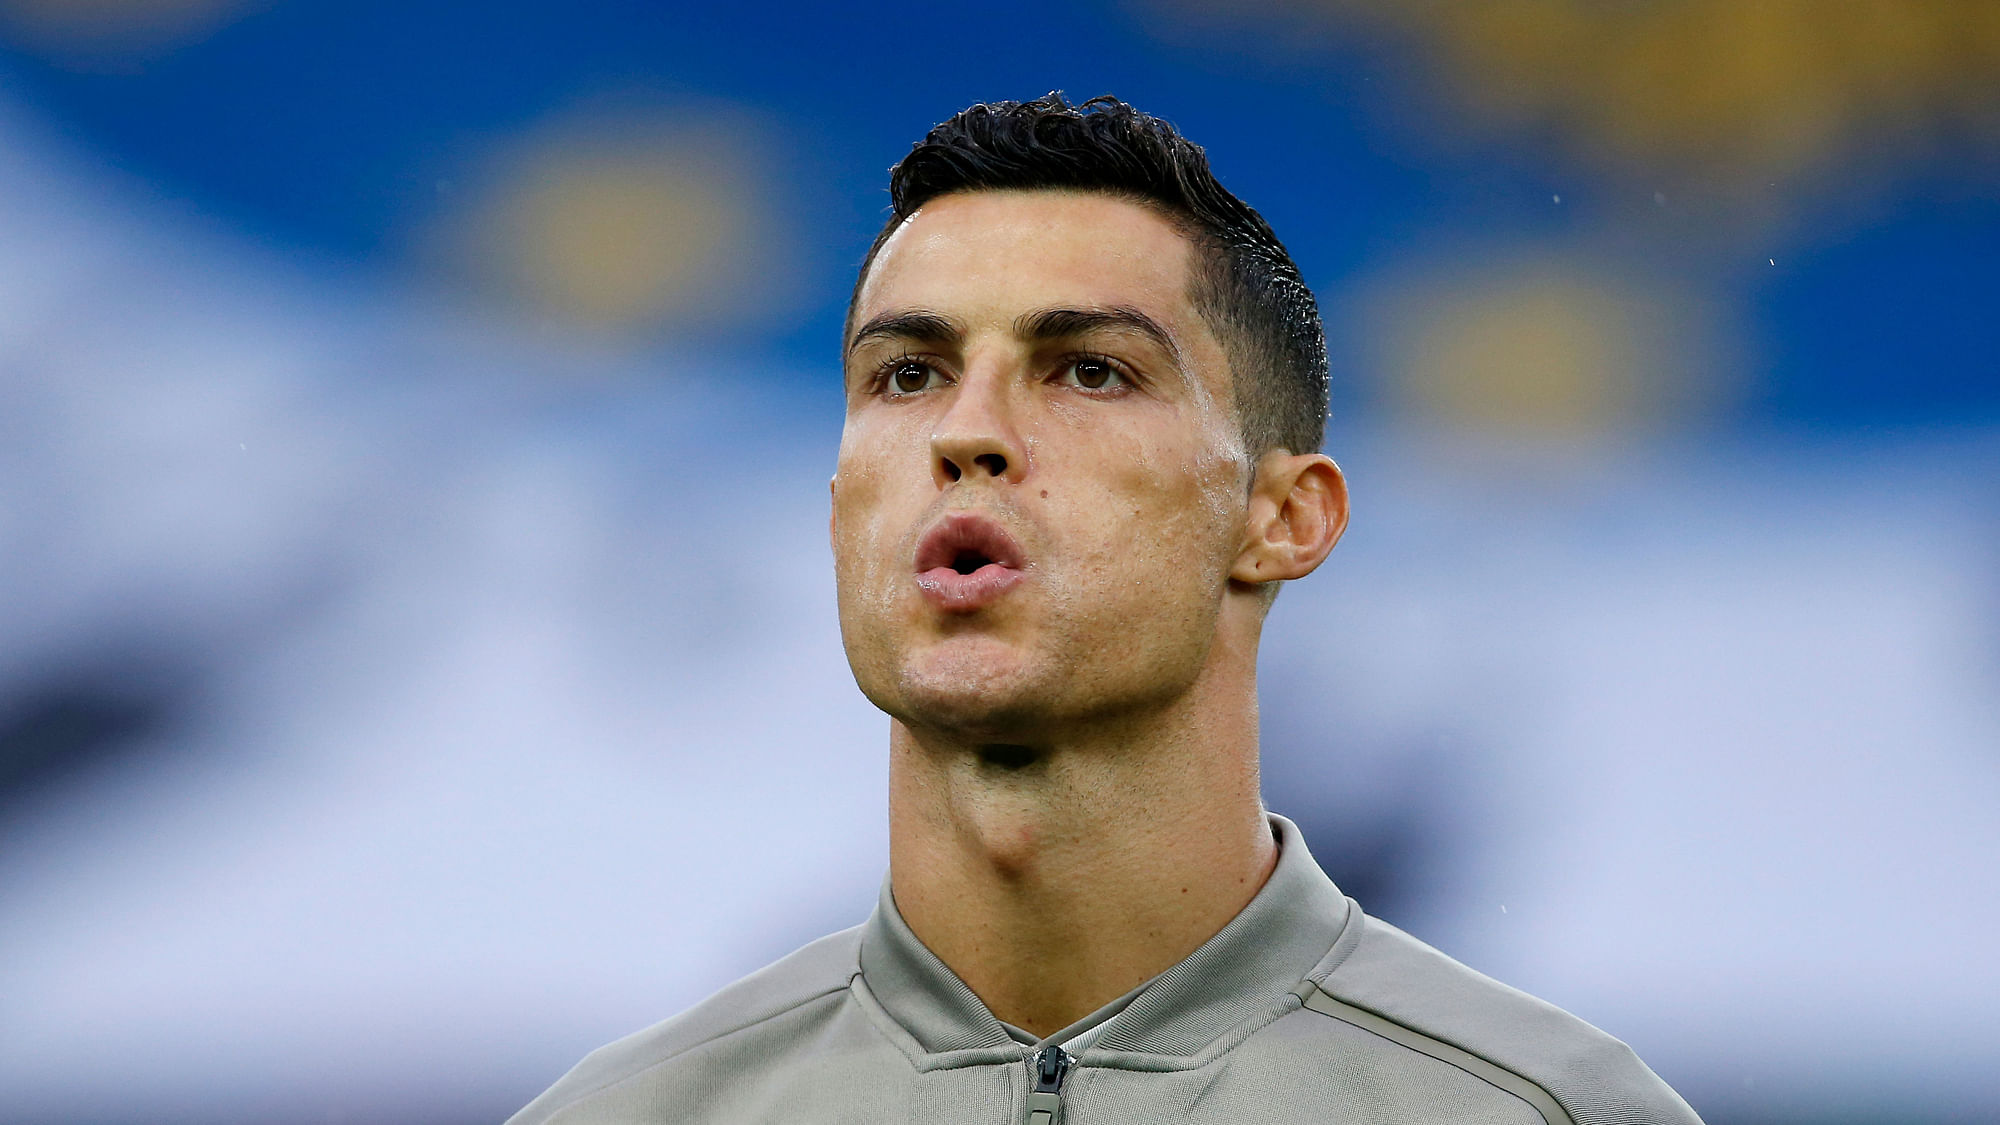 Cristiano Ronaldo’s new Las Vegas criminal defence lawyer went on the attack Wednesday, s